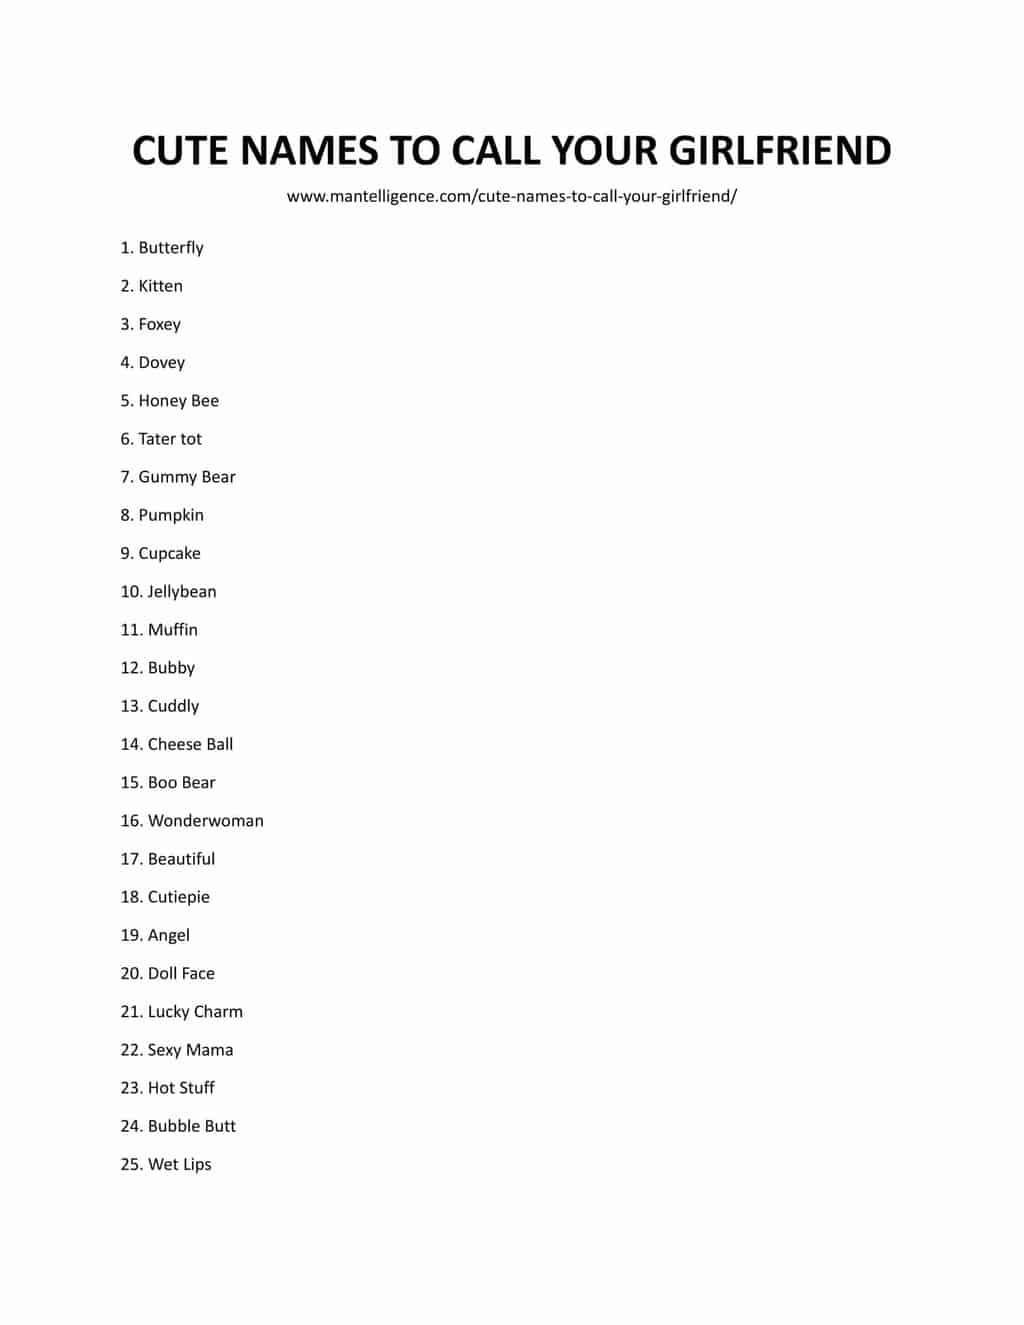 Downloadable List of Names